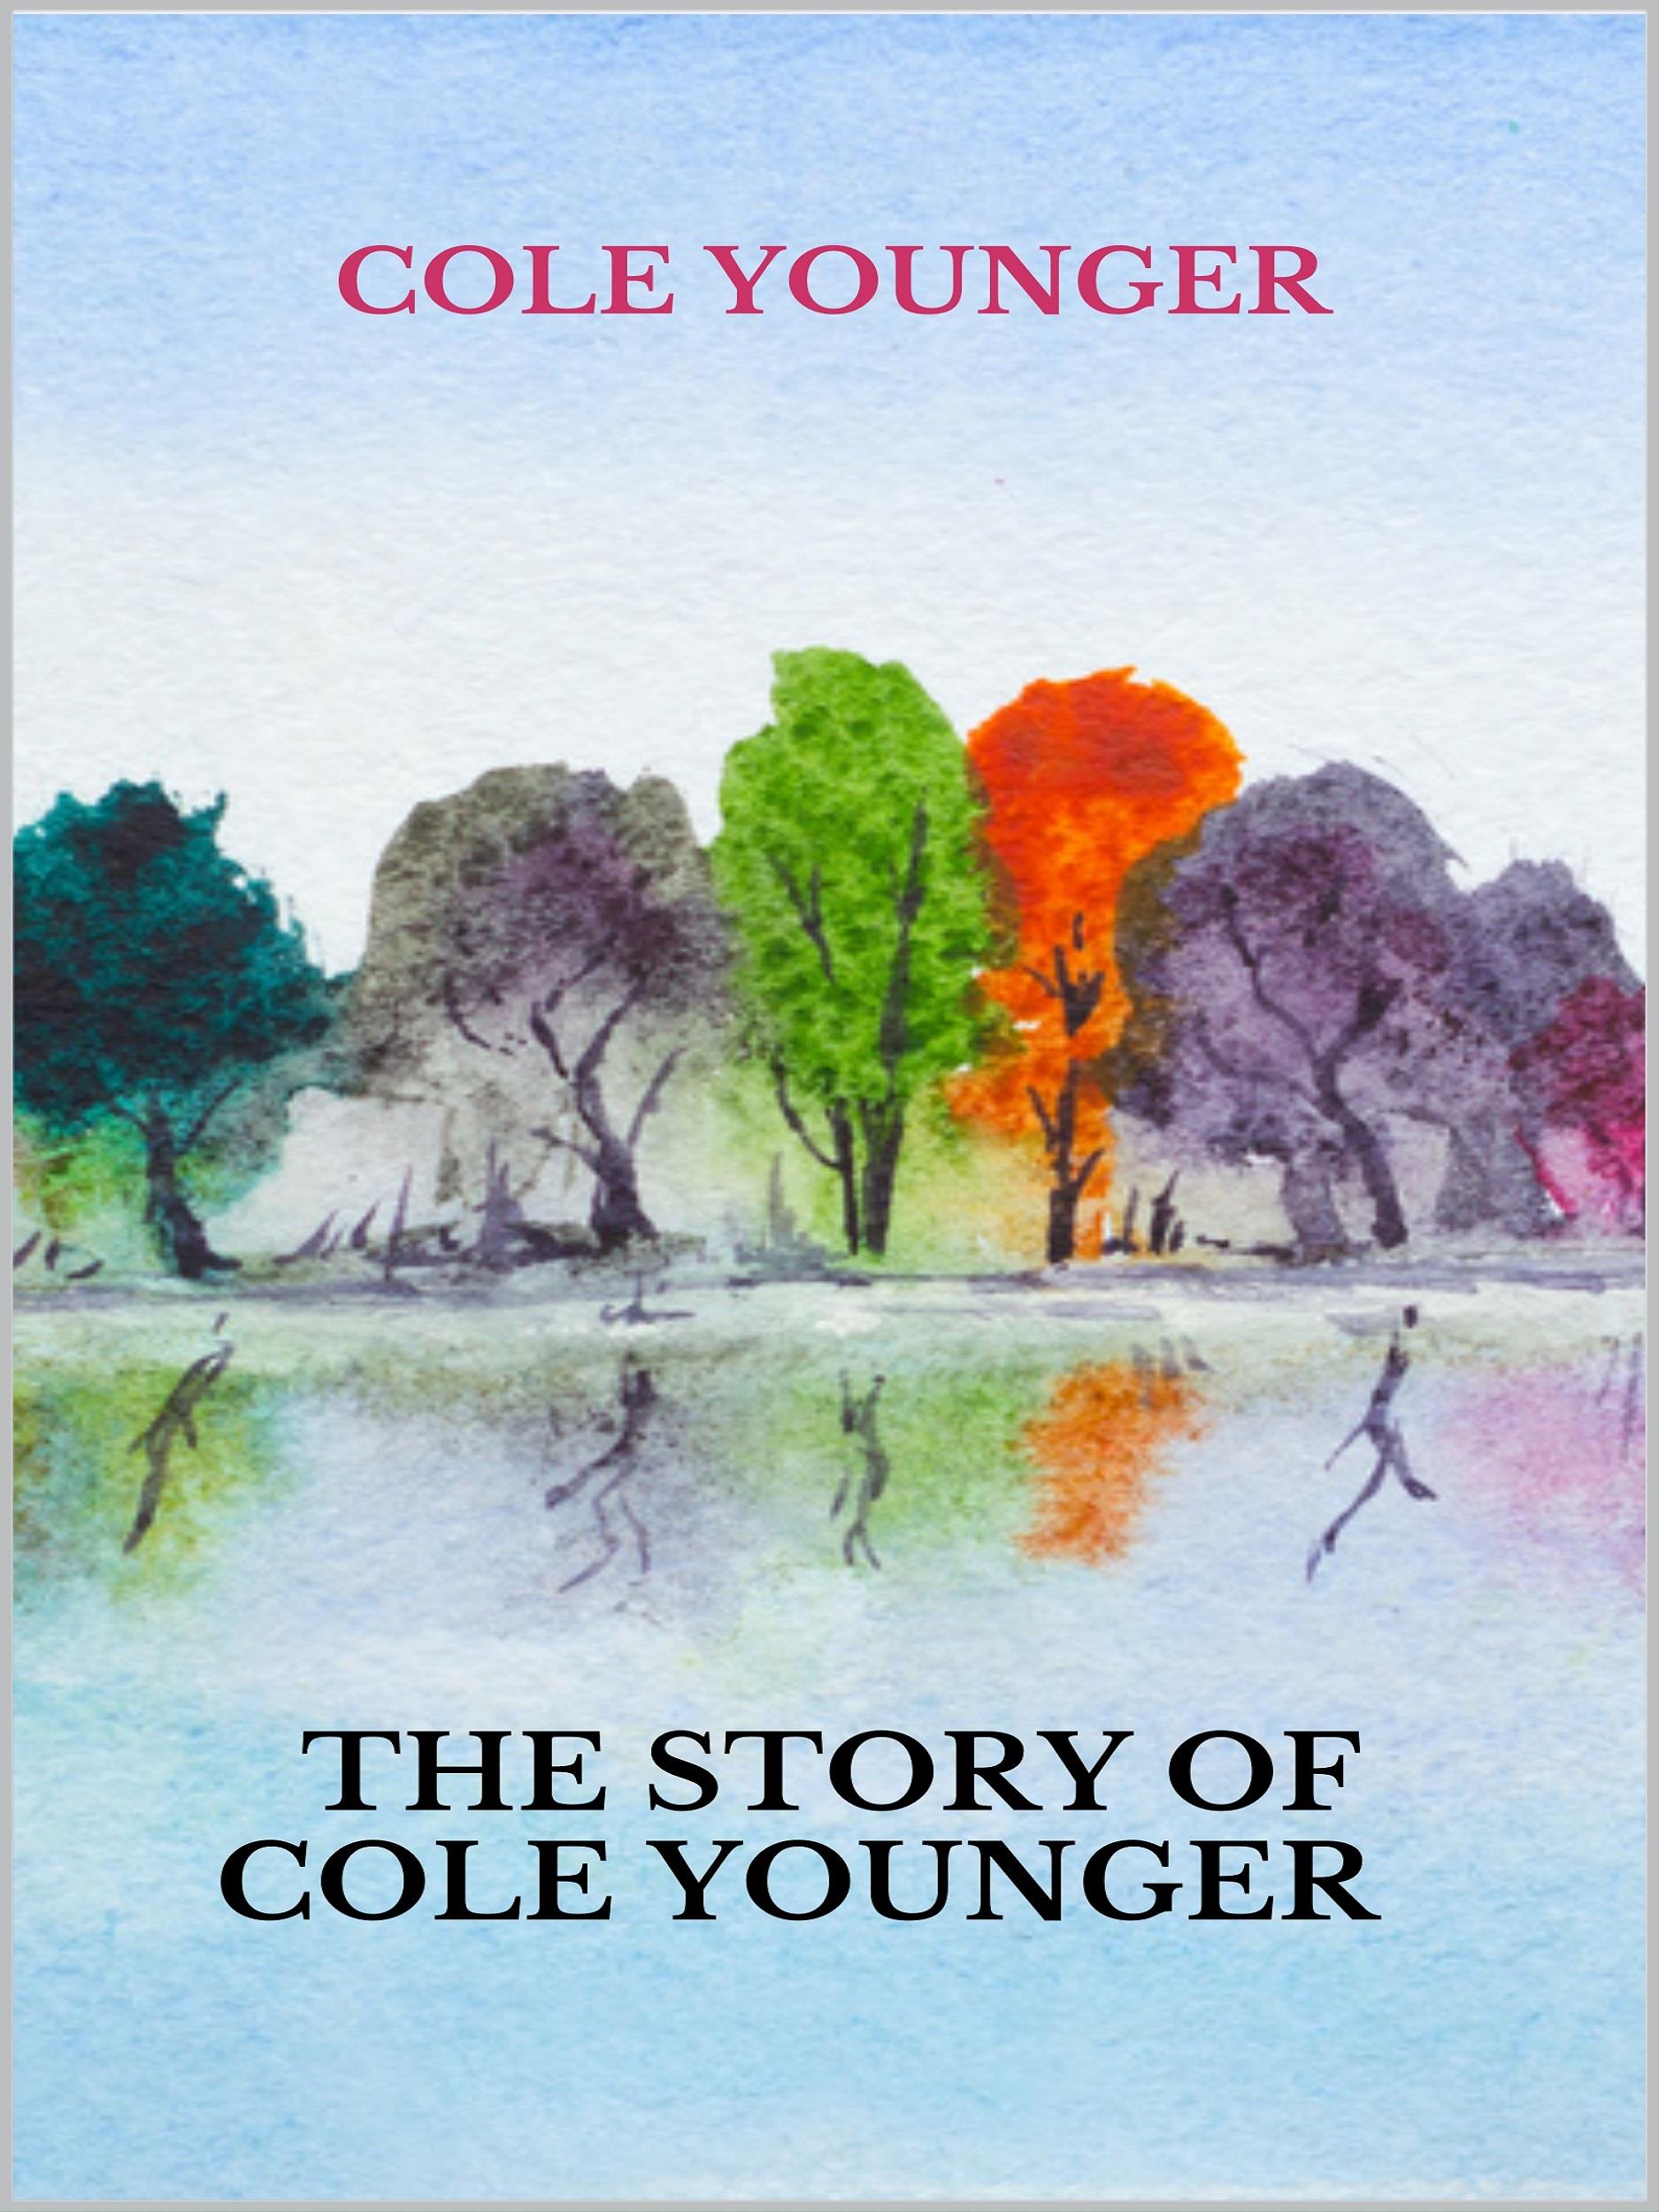 The story of Cole Younger